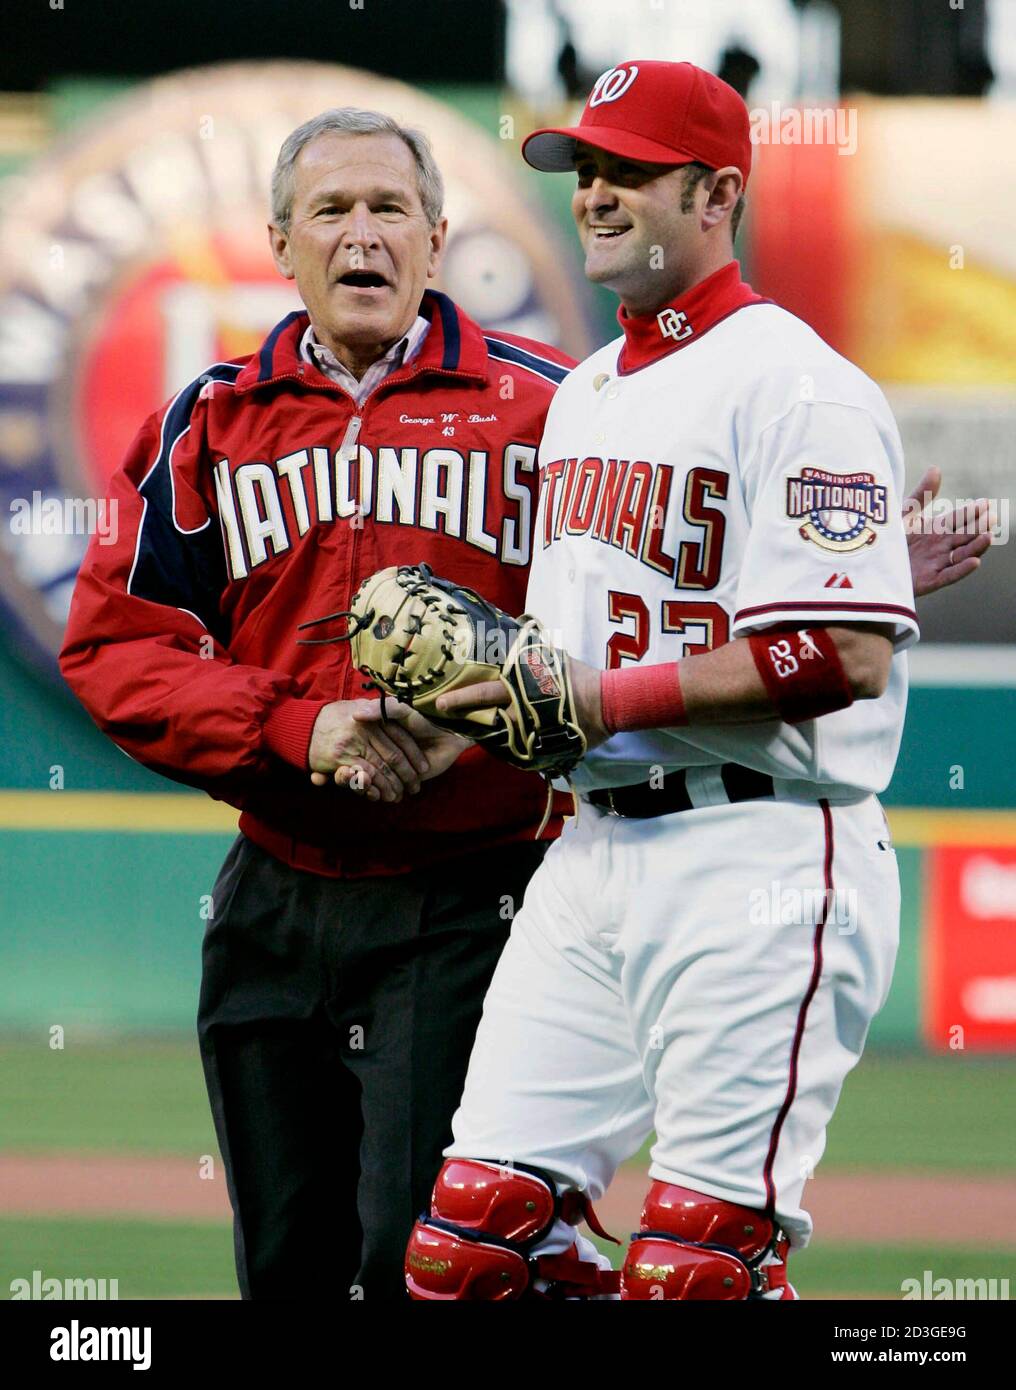 U.S. President George W. Bush shakes hands with catcher Brian Schneider after throwing out the first pitch for the home opener for the Washington Nationals at RFK Stadium in Washington, April 14, 2005. Bush was greeted by cheers from an estimated 48,000 fans who packed into Washington's Robert F. Kennedy Memorial Stadium to witness the historic return of the iconic American sport to the U.S. capital. REUTERS/Larry Downing  LSD/SV Stock Photo